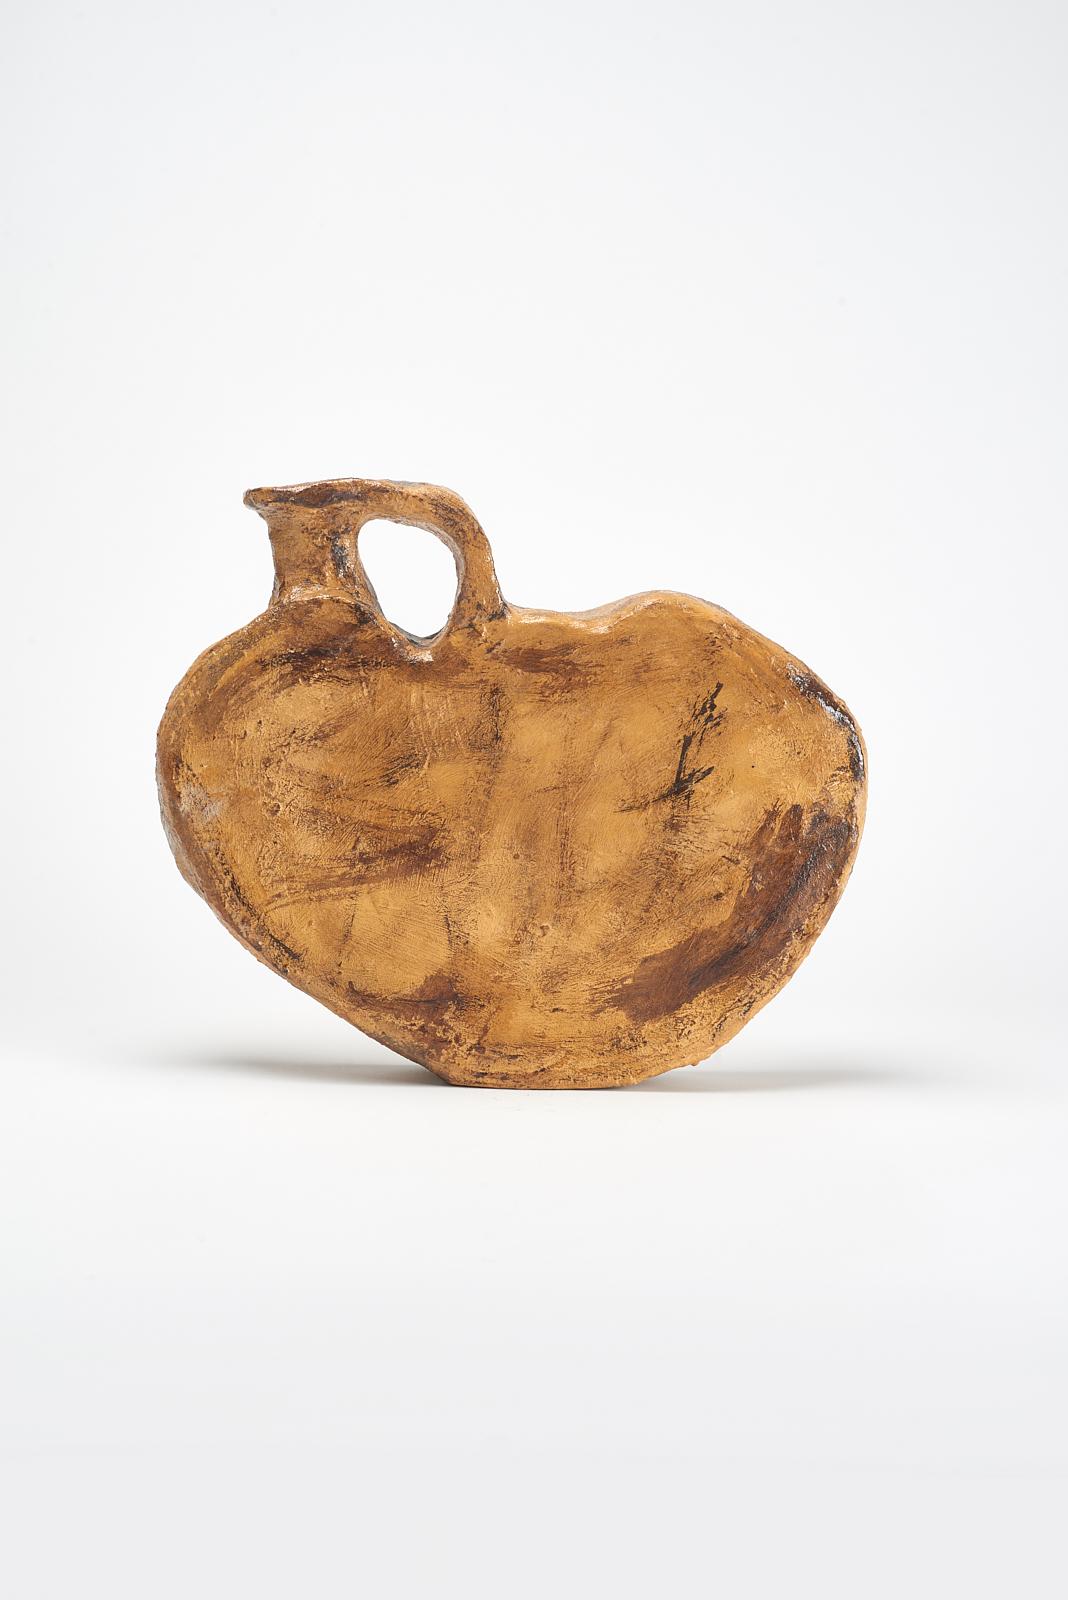 Alka vase by Willem Van Hooff
Dimensions: W 38 x H 28 cm
Materials: Earthenware, ceramic, pigments and glaze

Willem van Hooff is a designer based in Eindhoven.
He is a driven builder, were he likes to see design as his tool to express a